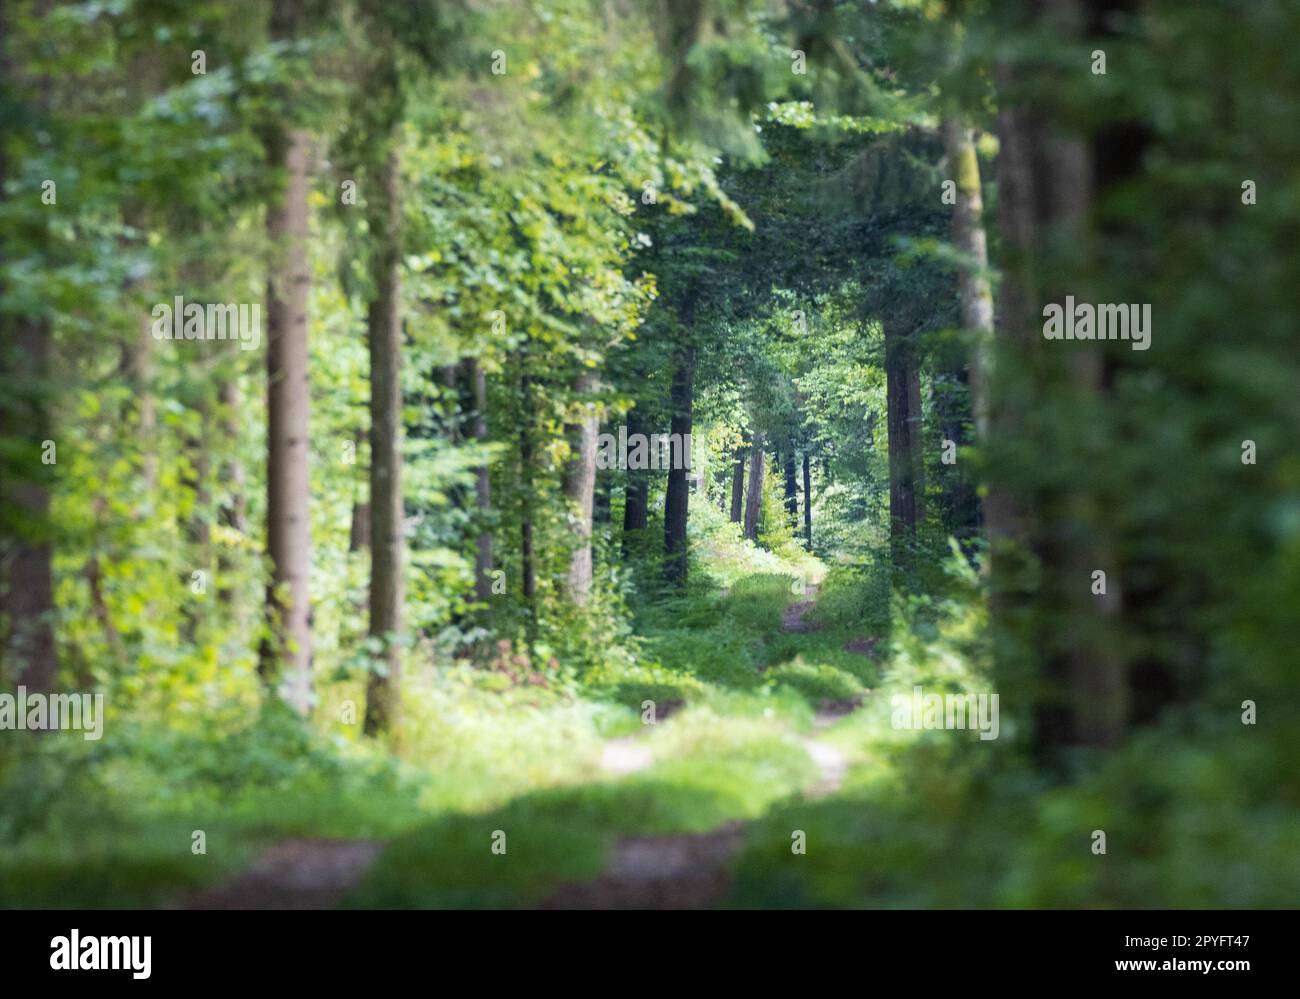 Dirt road in forest with vanishing point Stock Photo